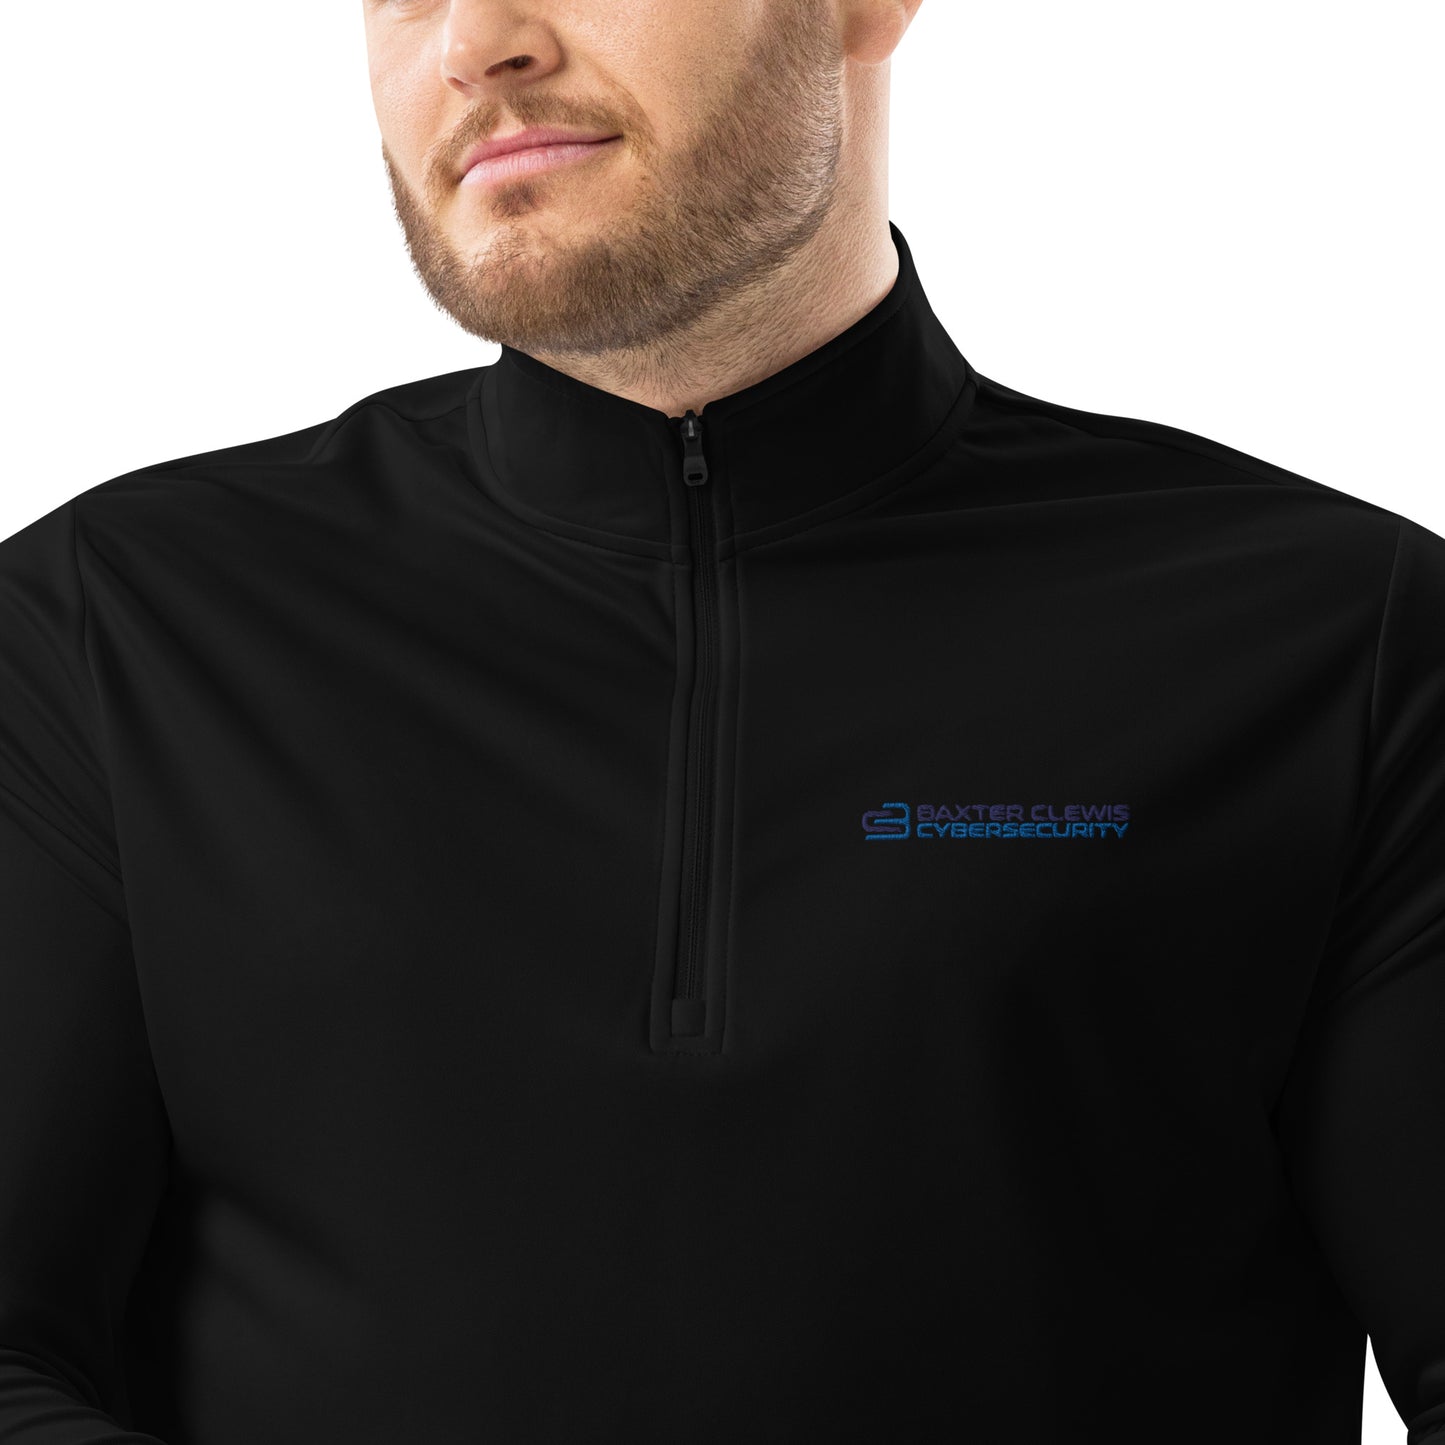 Baxter Clewis Cybersecurity Quarter zip pullover